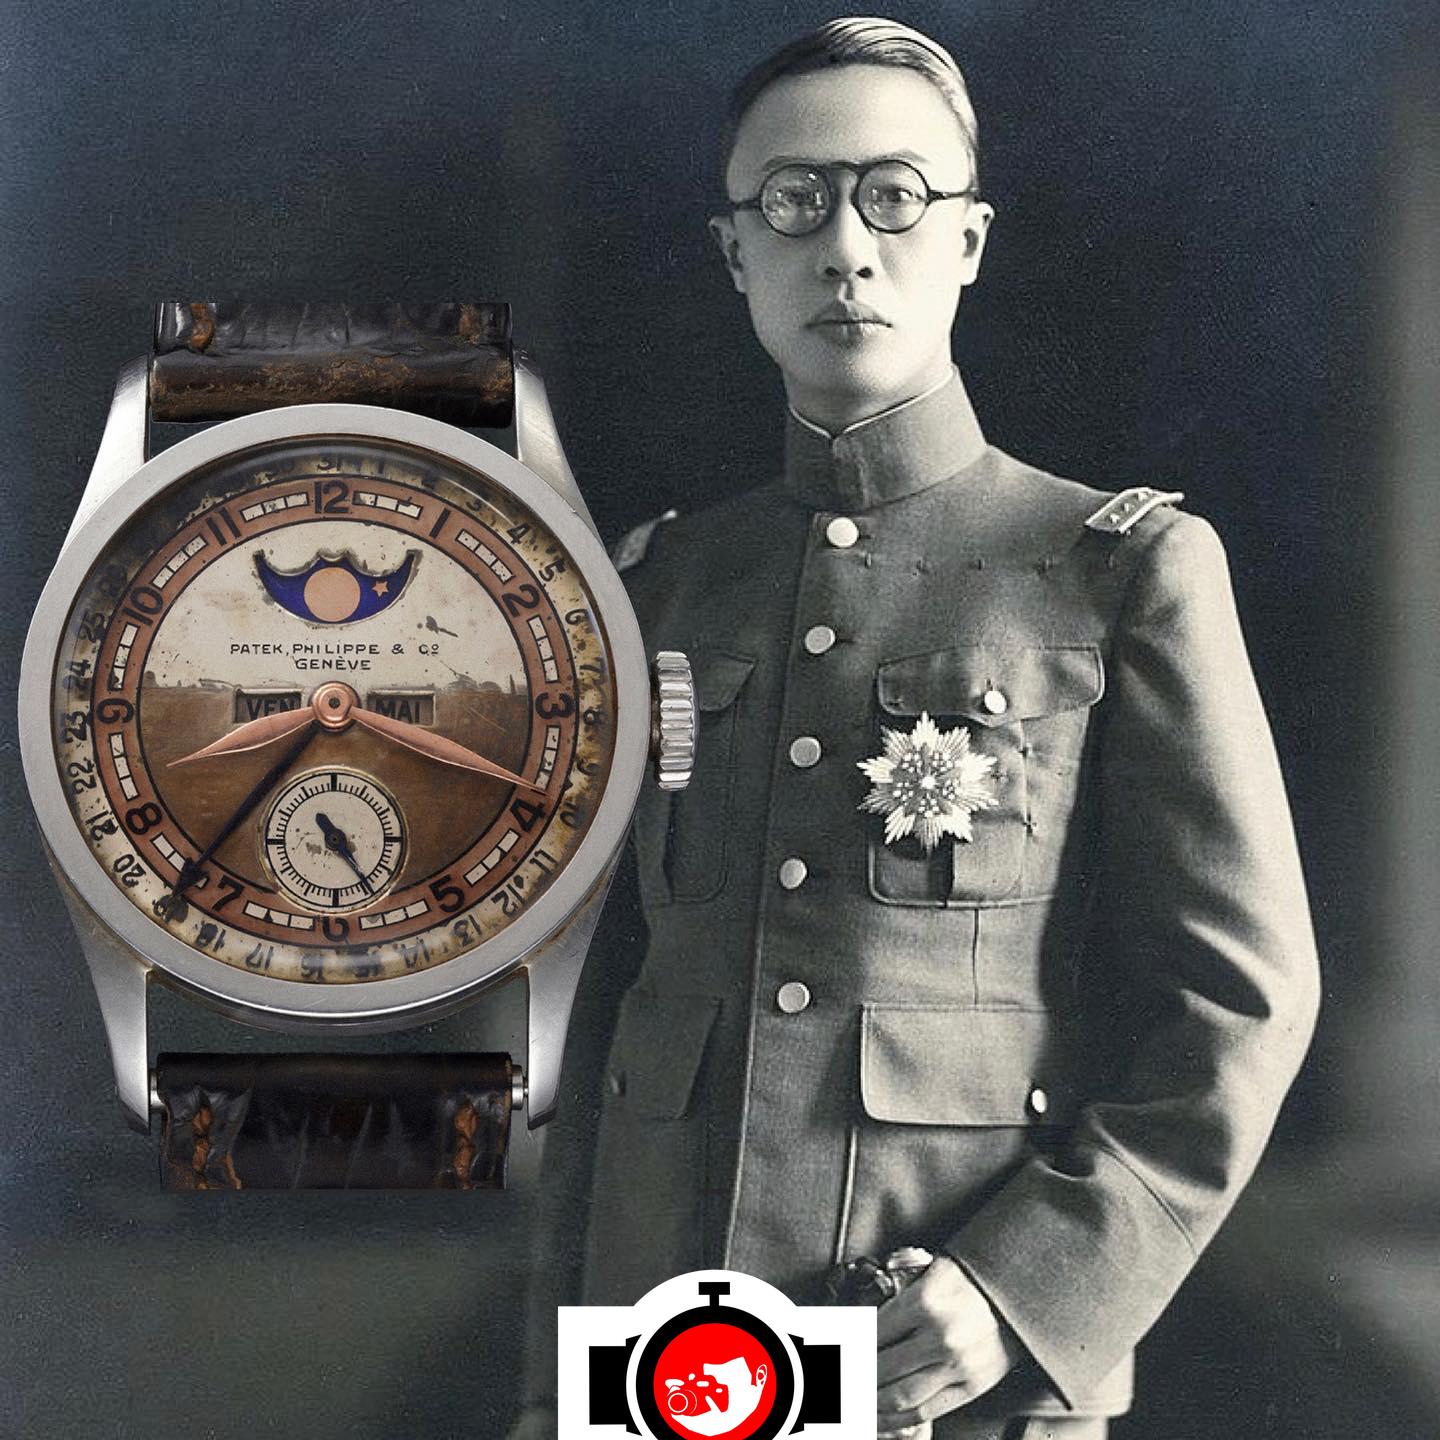 royal Aisin-Gioro Puyi spotted wearing a Patek Philippe 96